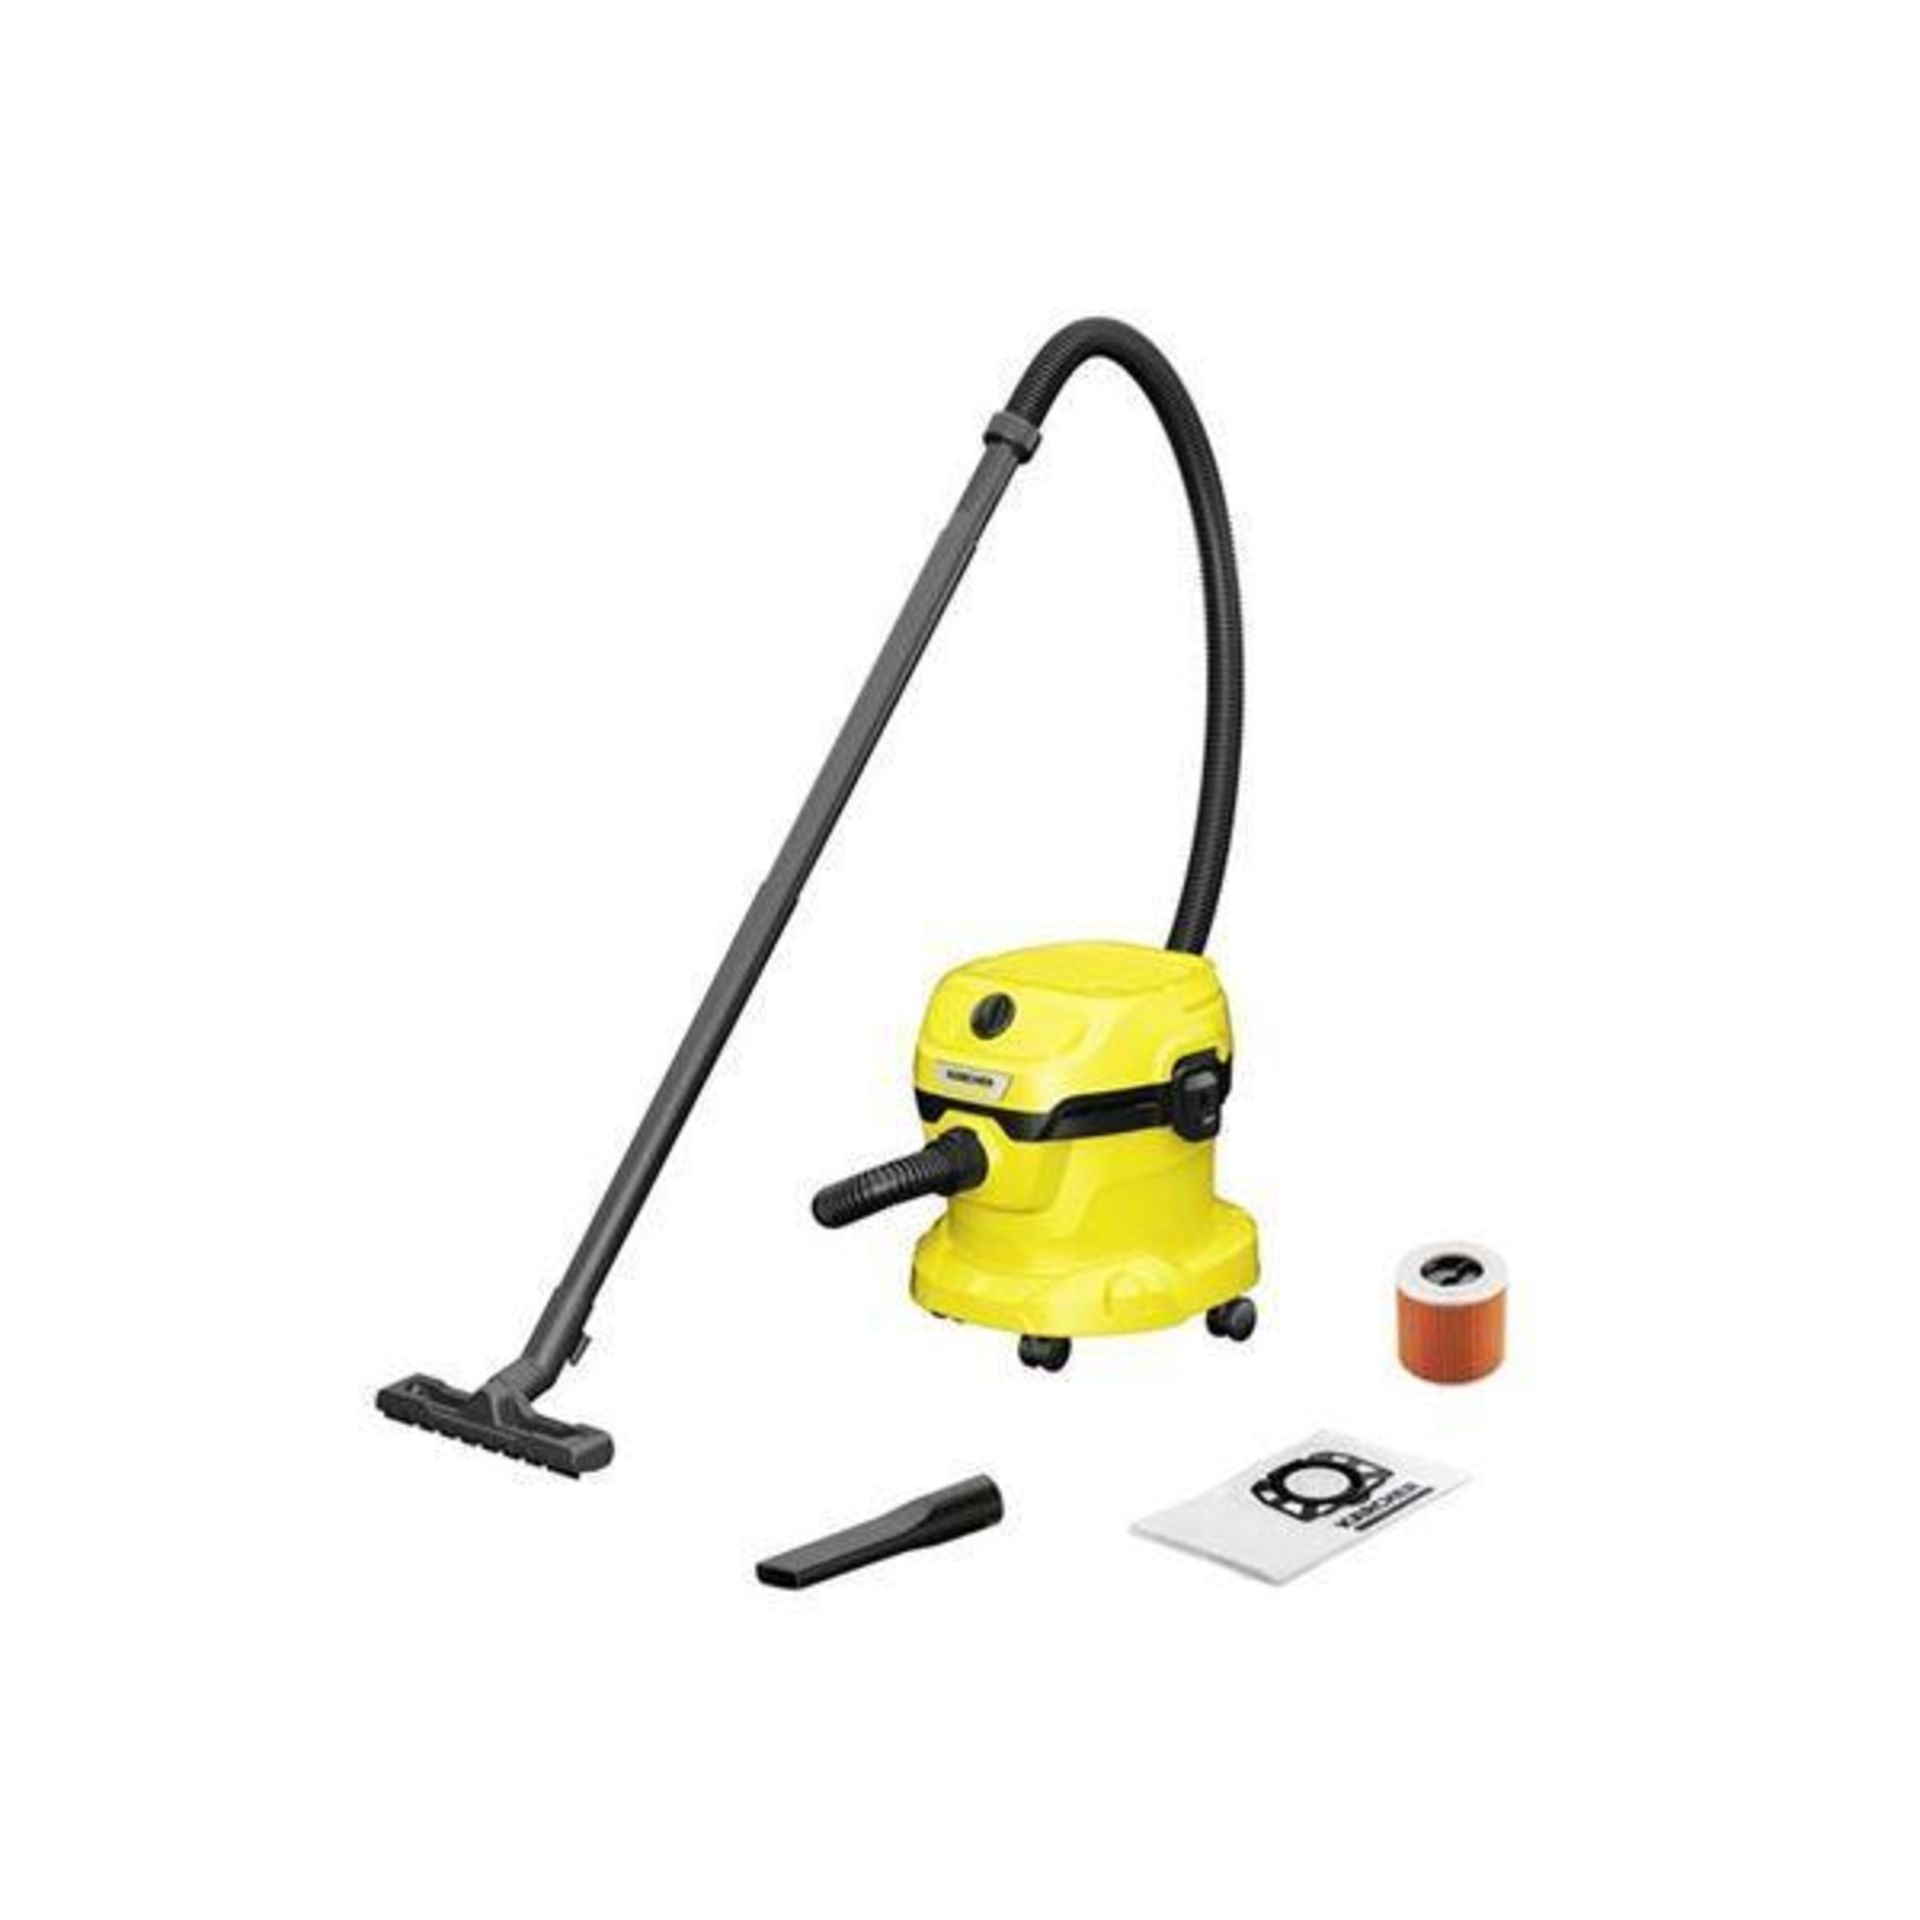 Karcher WD 2 Plus Wet and Dry Vacuum Cleaner 12L - SR48. The powerful Karcher WD 2 Plus wet and